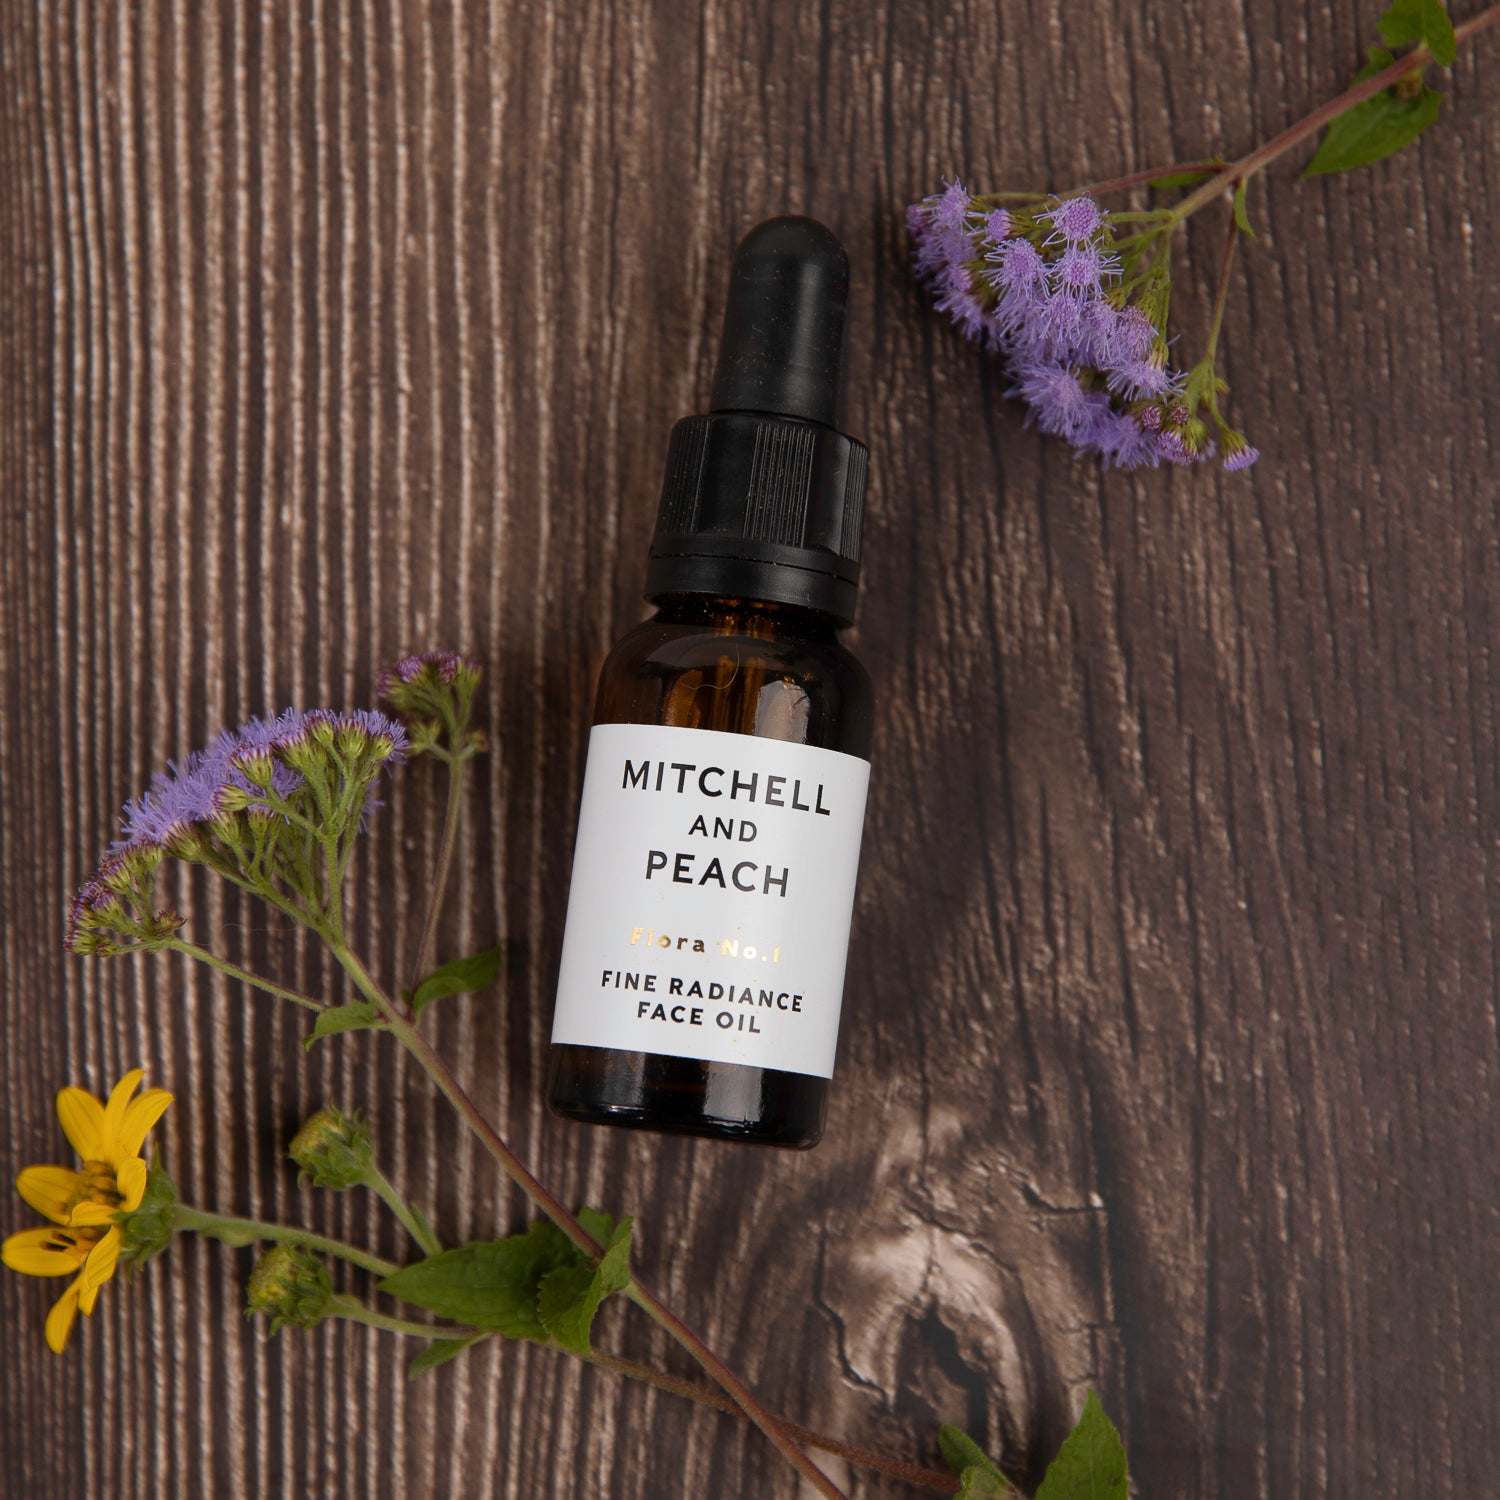 MITCHELL AND PEACH | FINE RADIANCE FACE OIL | $58